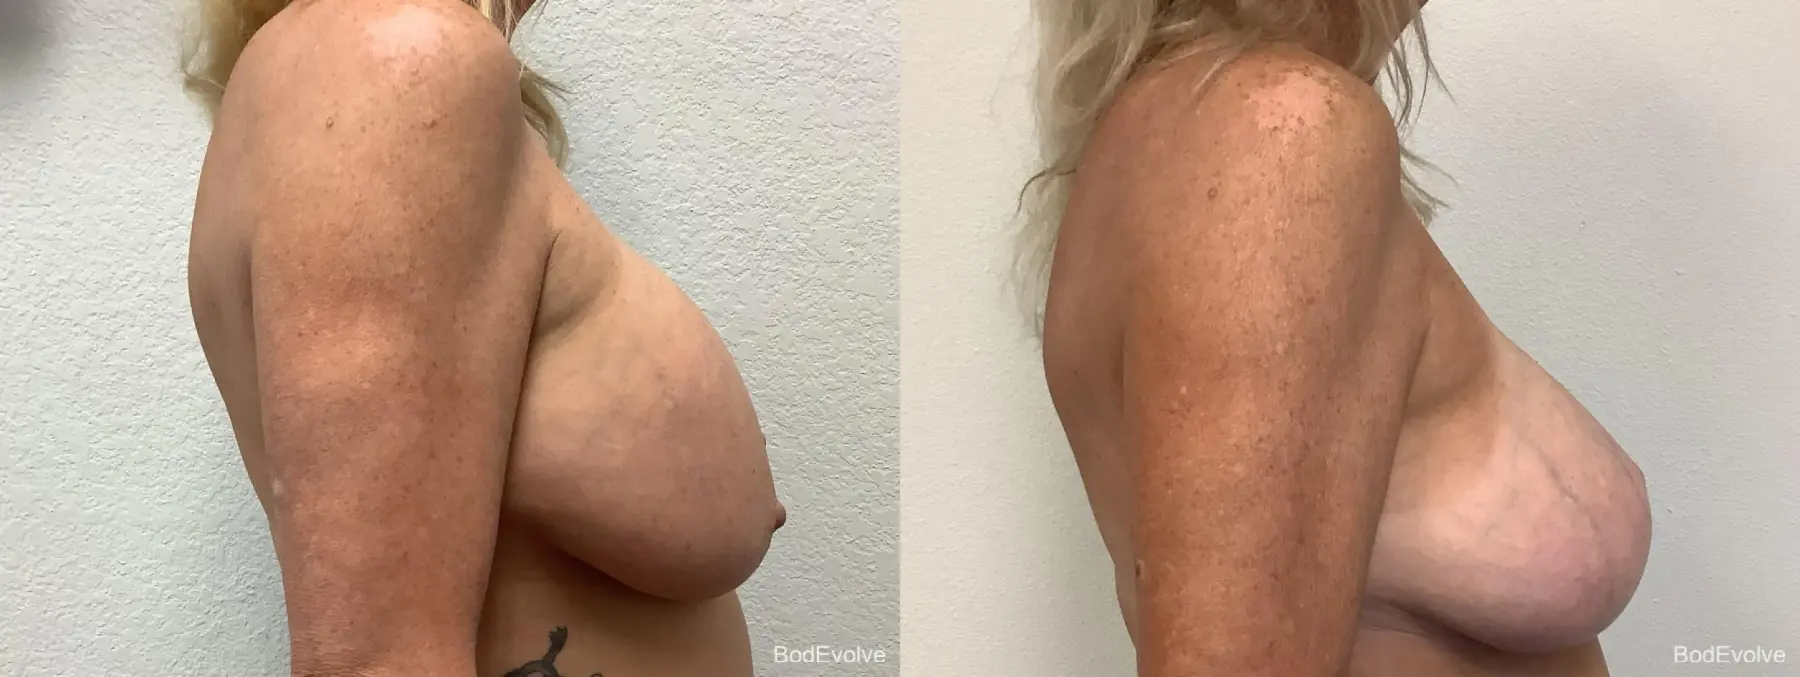 Breast Augmentation With Lift: Patient 3 - Before and After 5